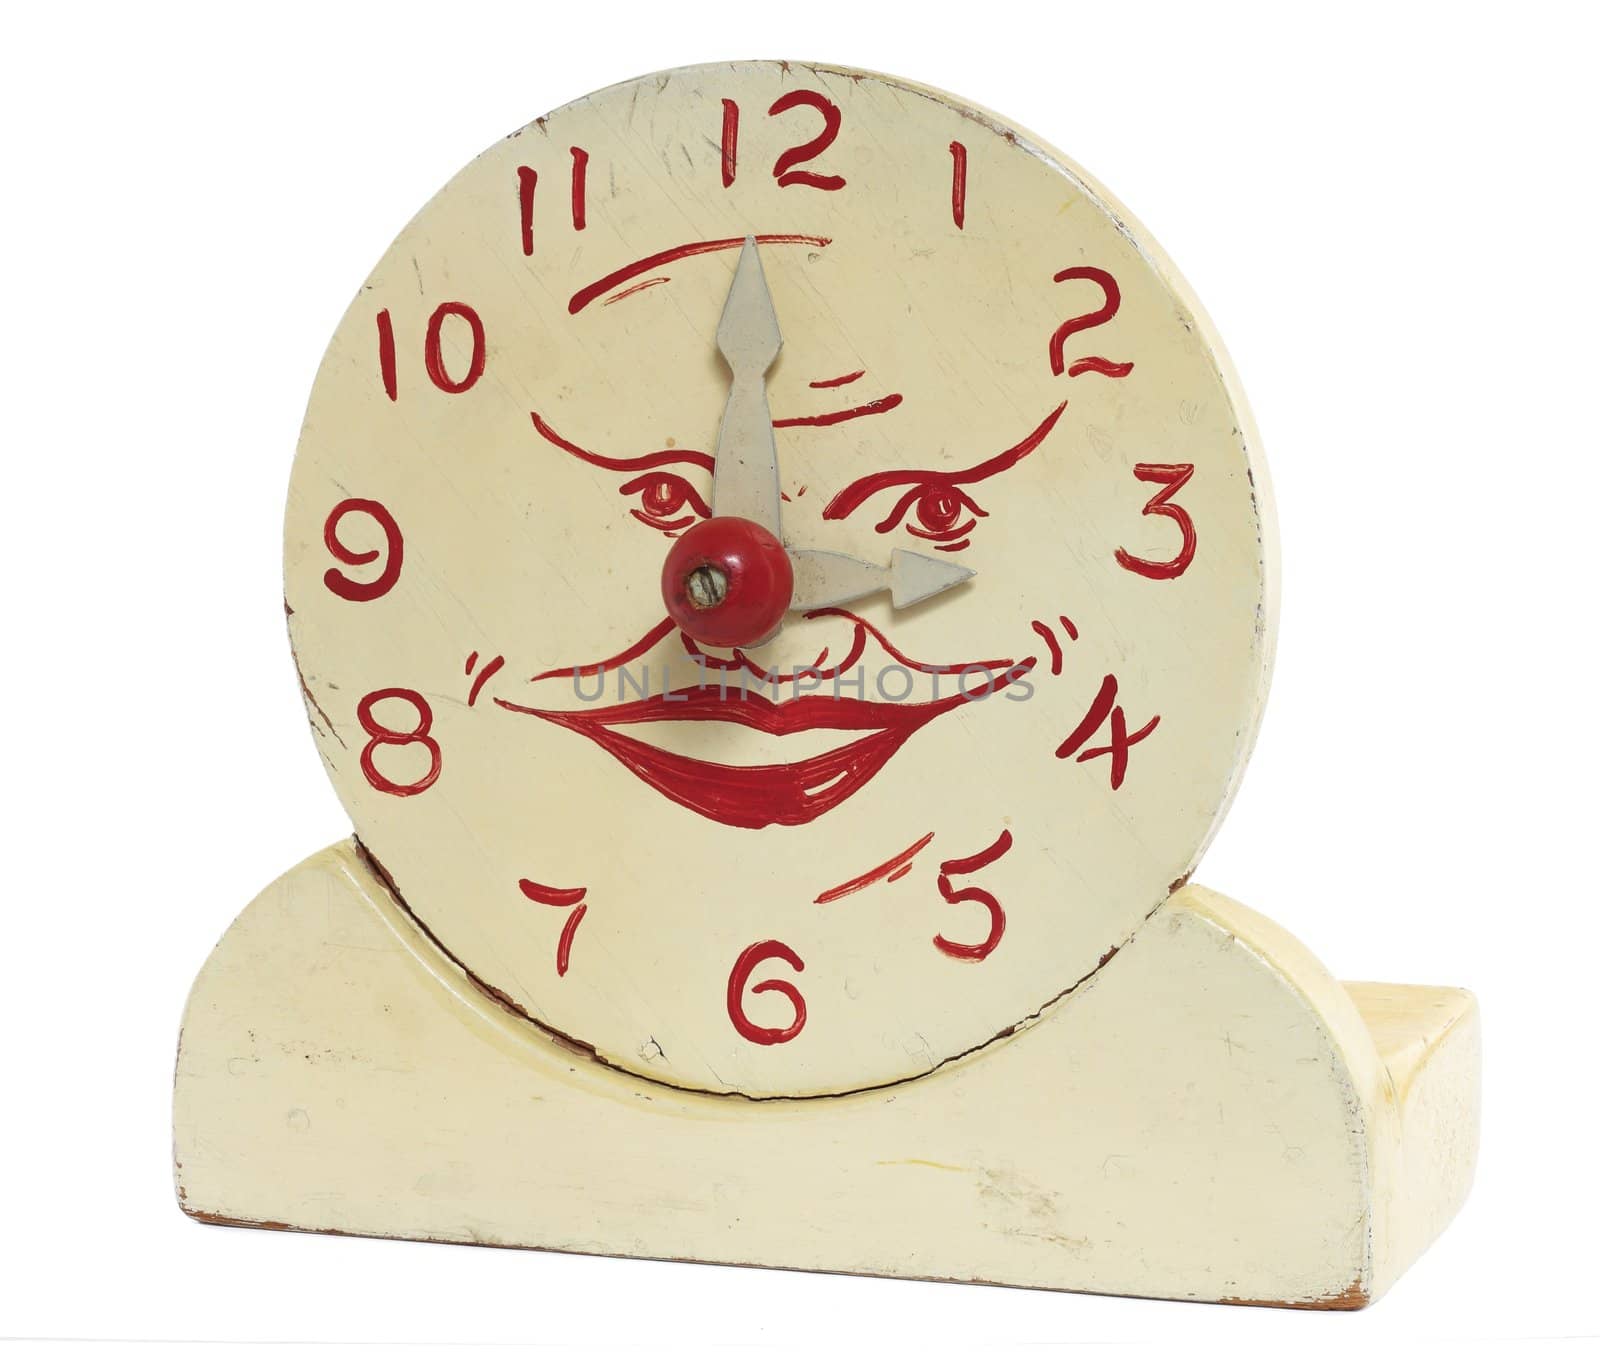 An old handcrafted wood toy clock isolated on white with clipping path. Hand painted white with red numerals and a face at the center.